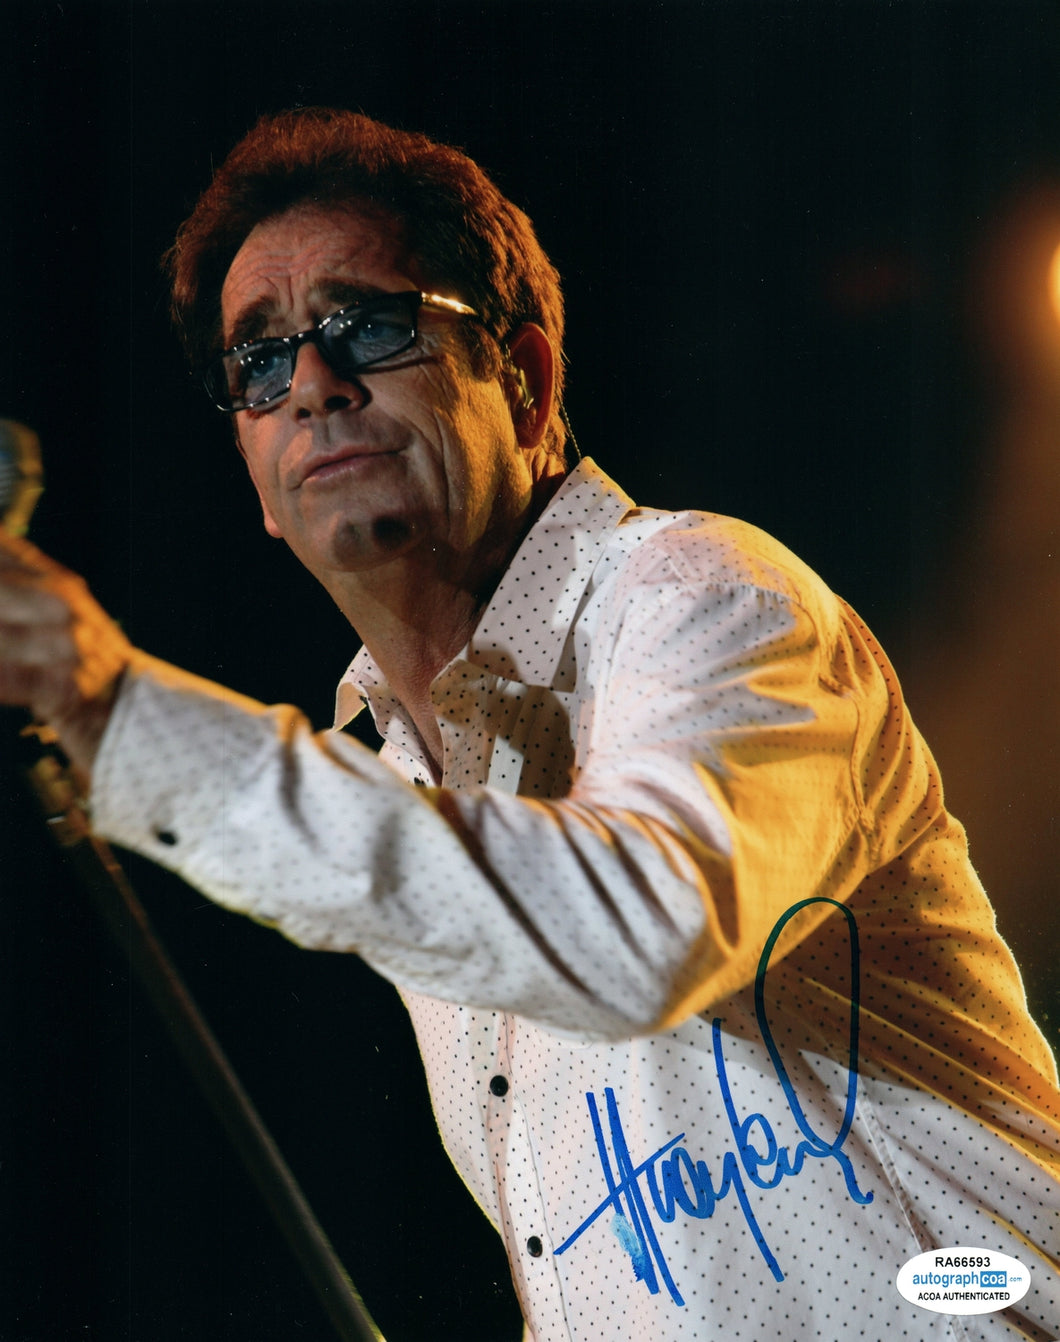 Huey Lewis Autographed Signed 8x10 Photo The News